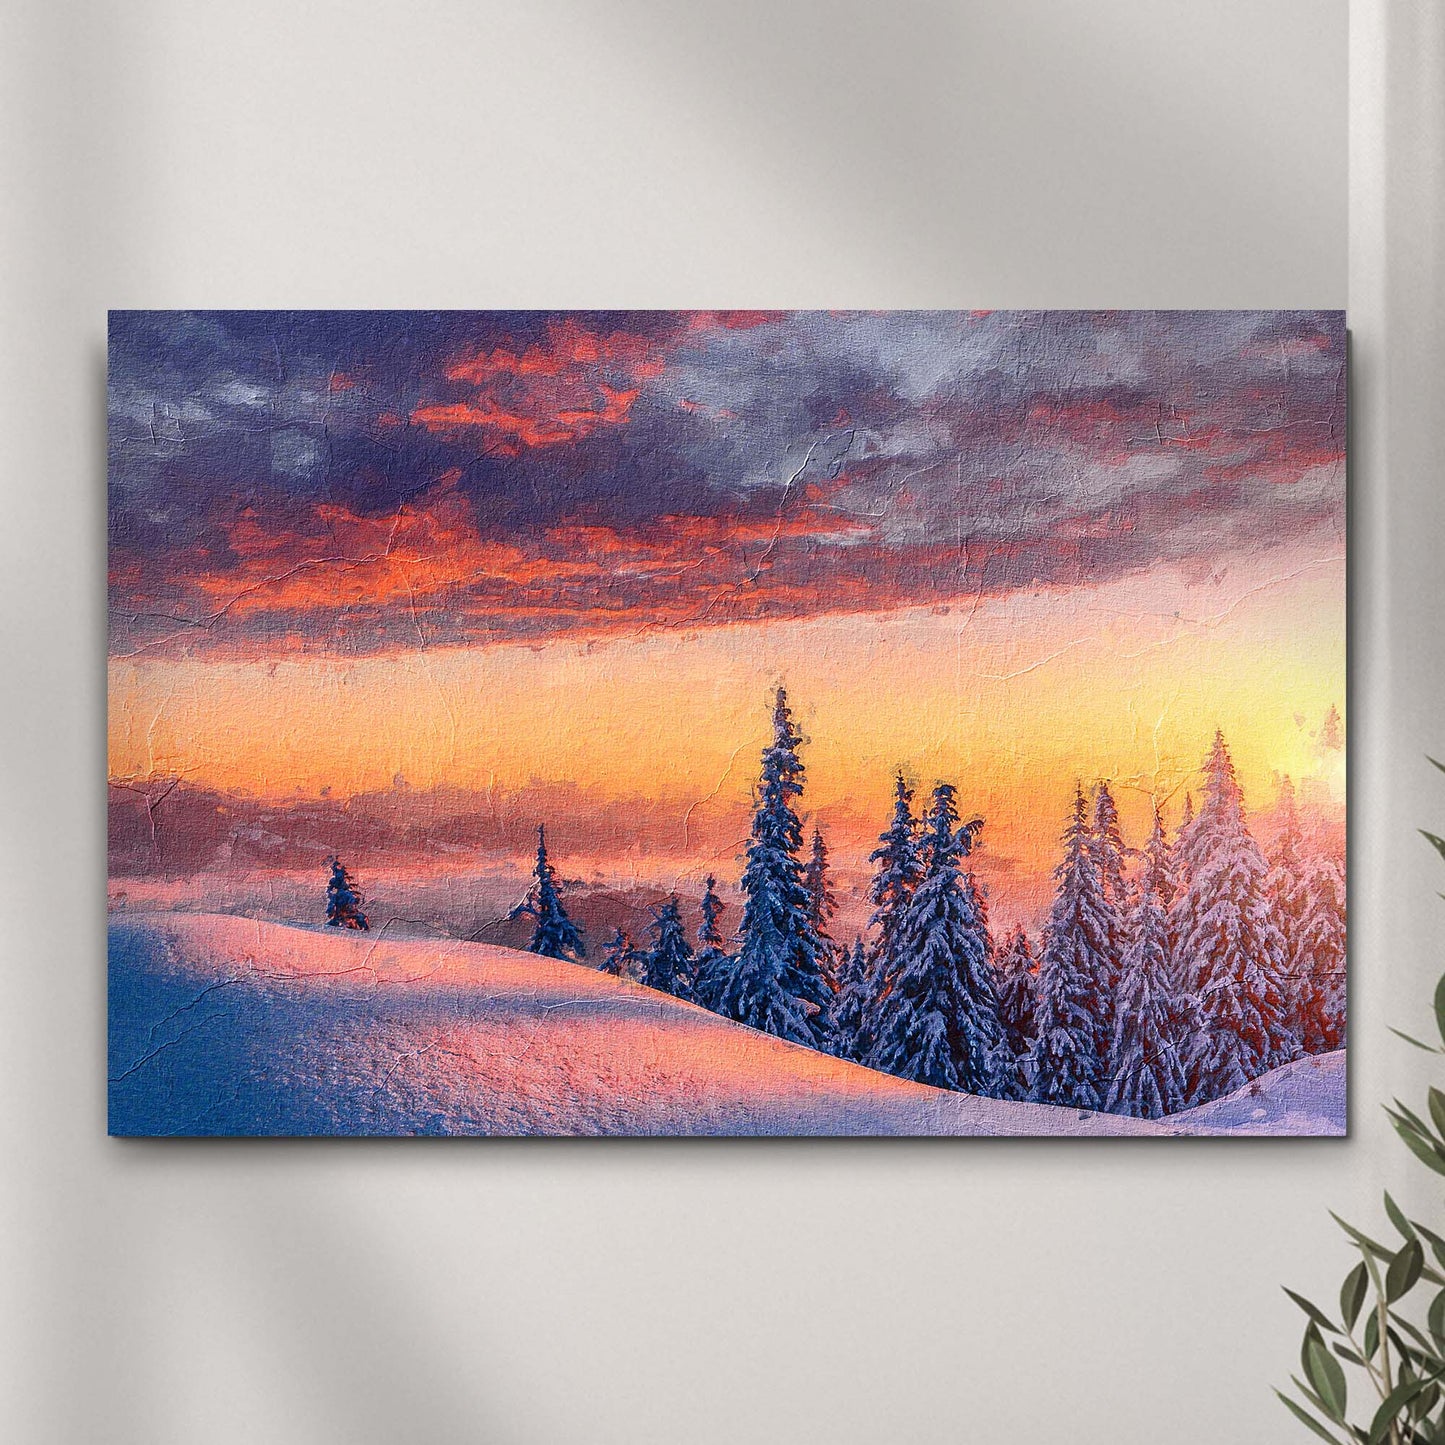 Arctic Mountain At Sunset Canvas Wall Art - Image by Tailored Canvases